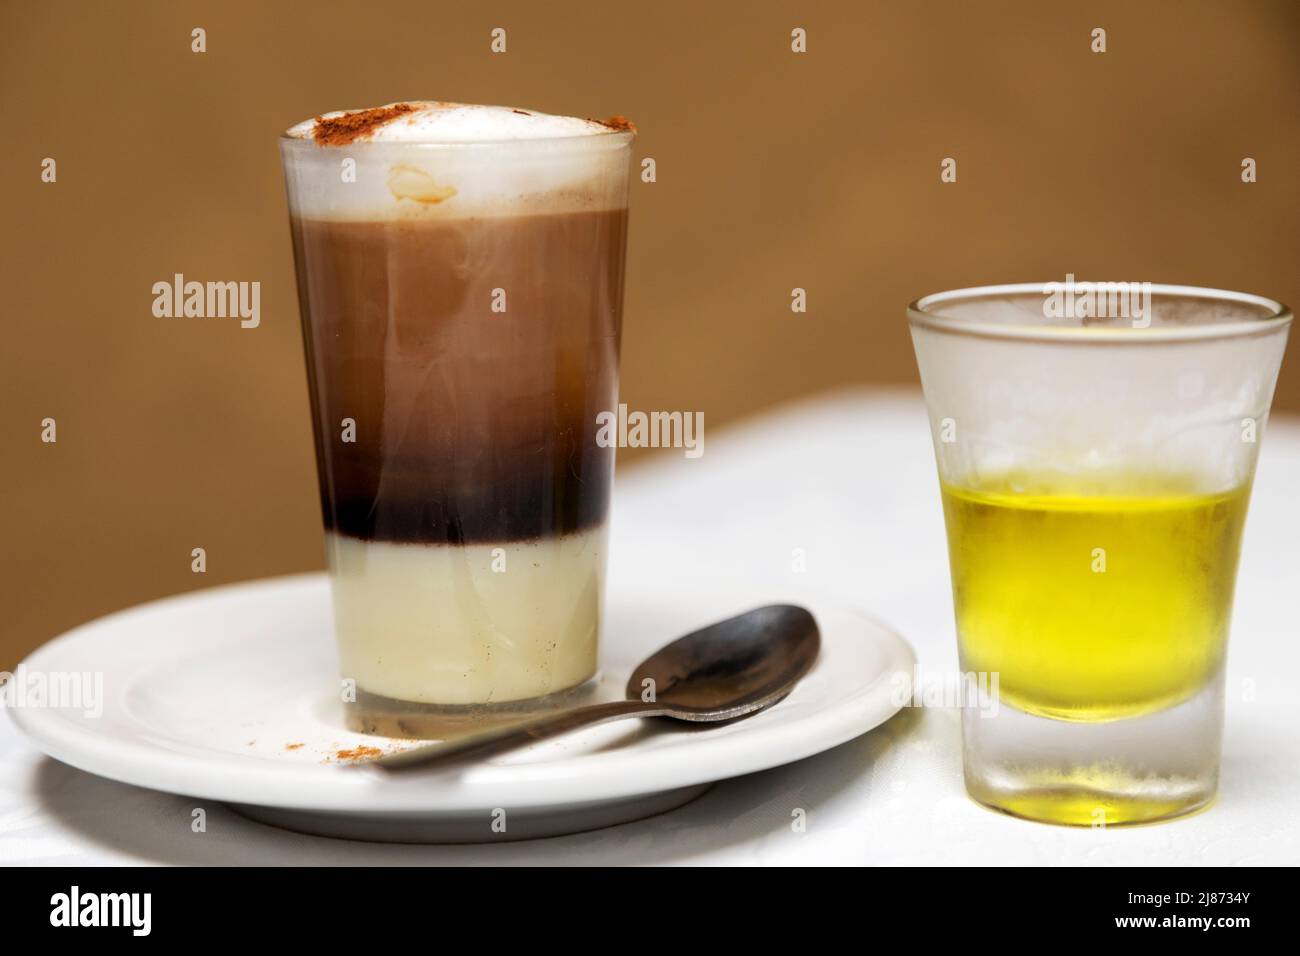 A traditional Barraquito coffee and glass of liqueur served in Tenerife, Spain. The style of coffee is popular across the Canary Islands and features Stock Photo